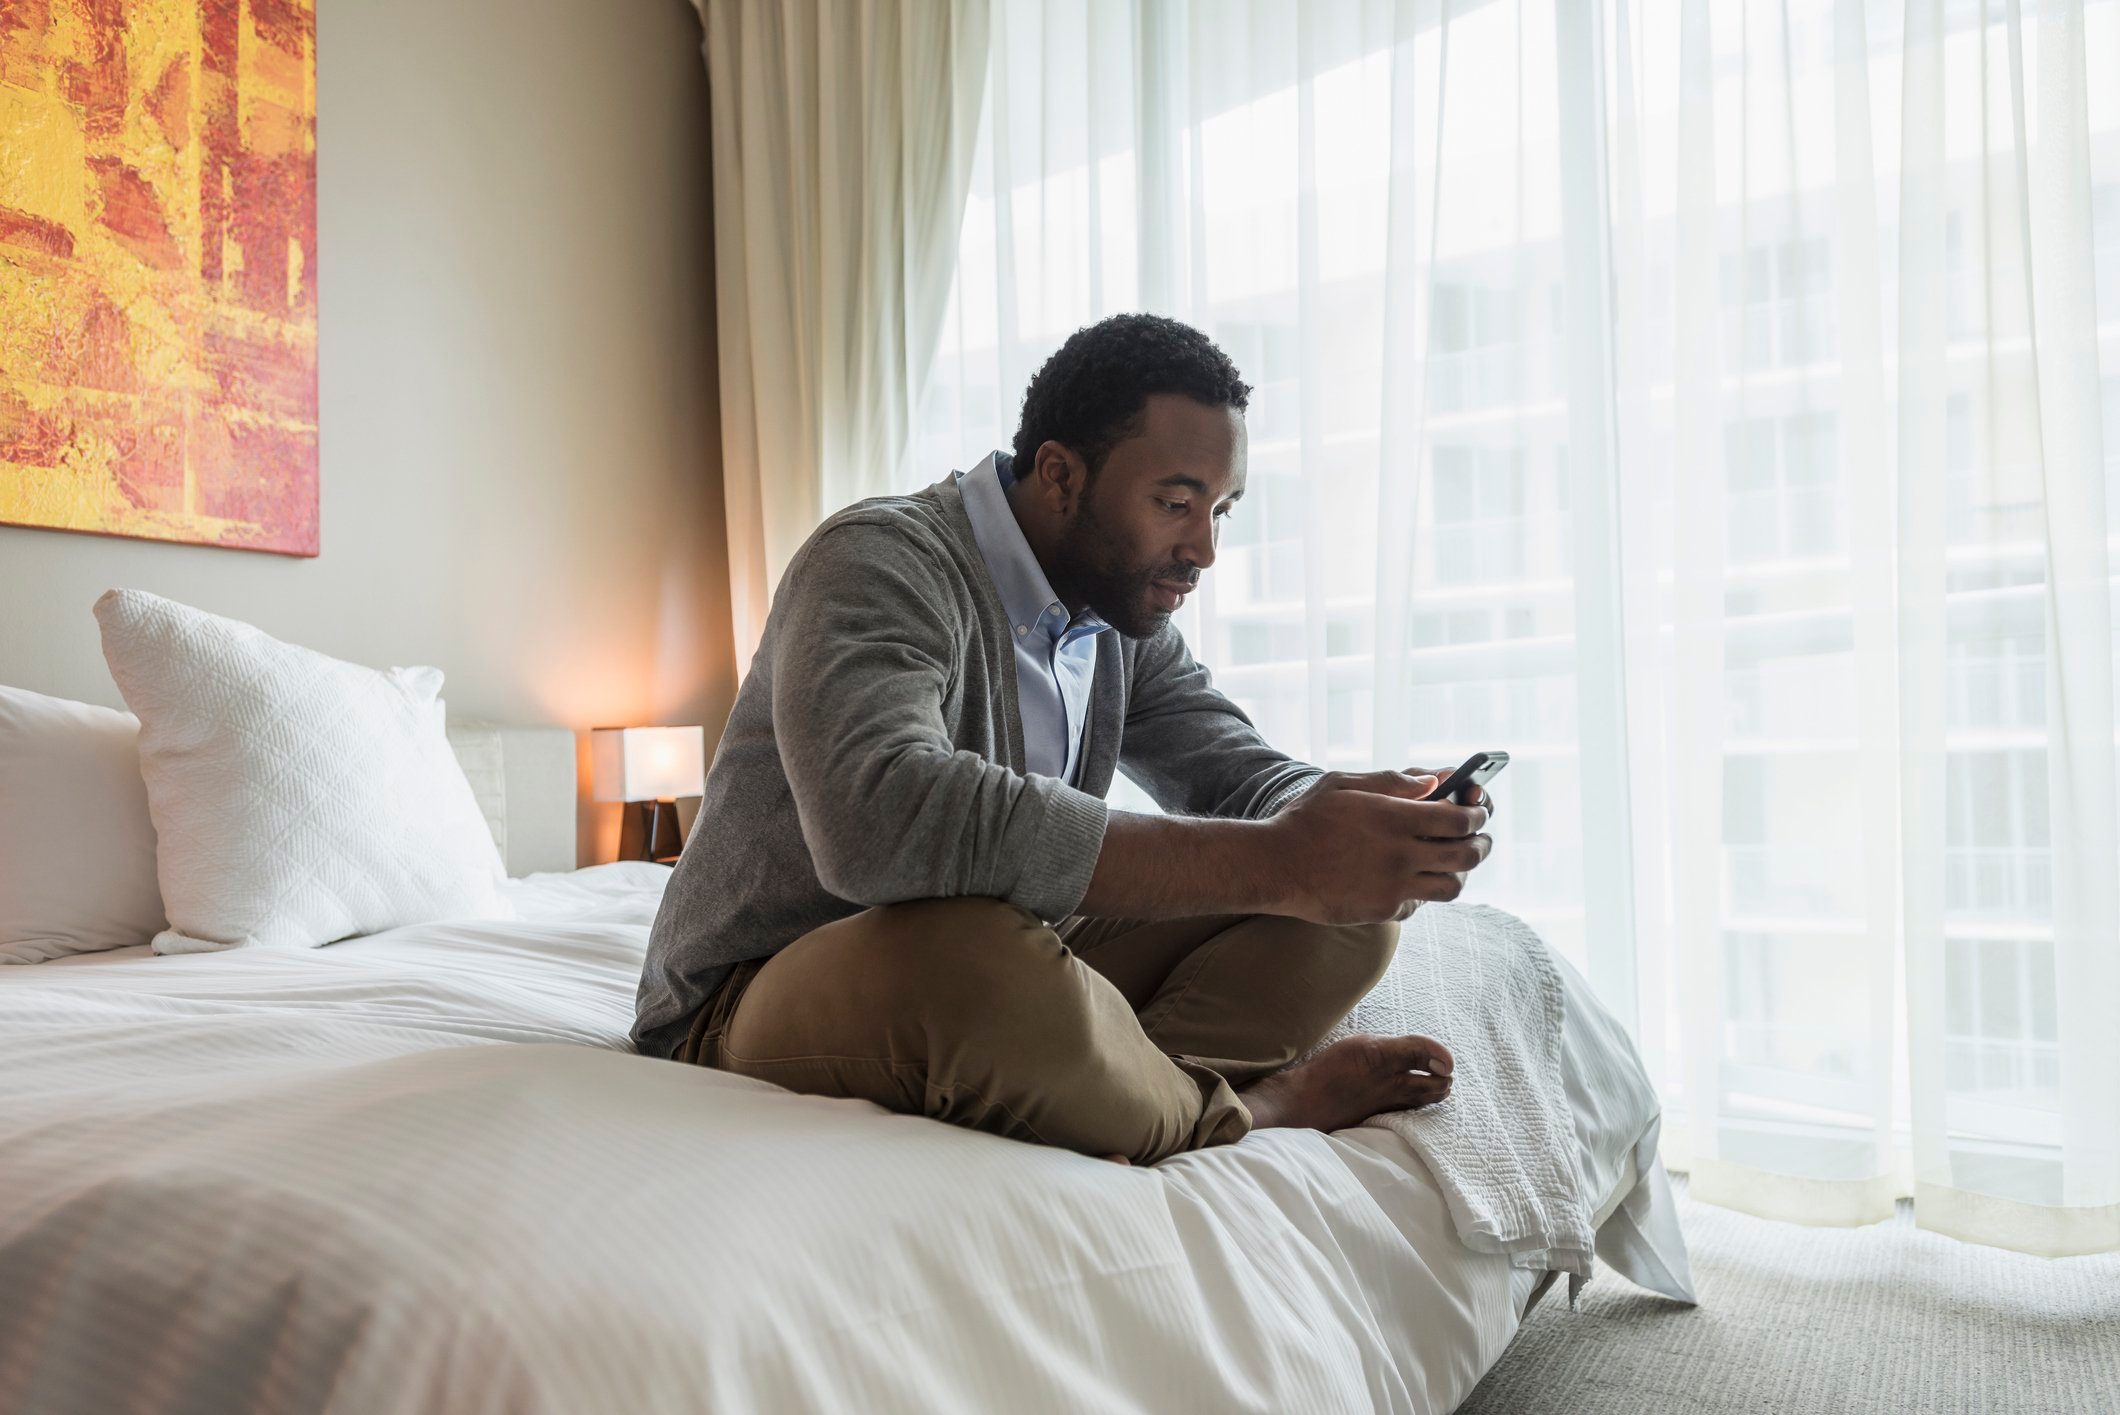 Black man using cell phone on bed